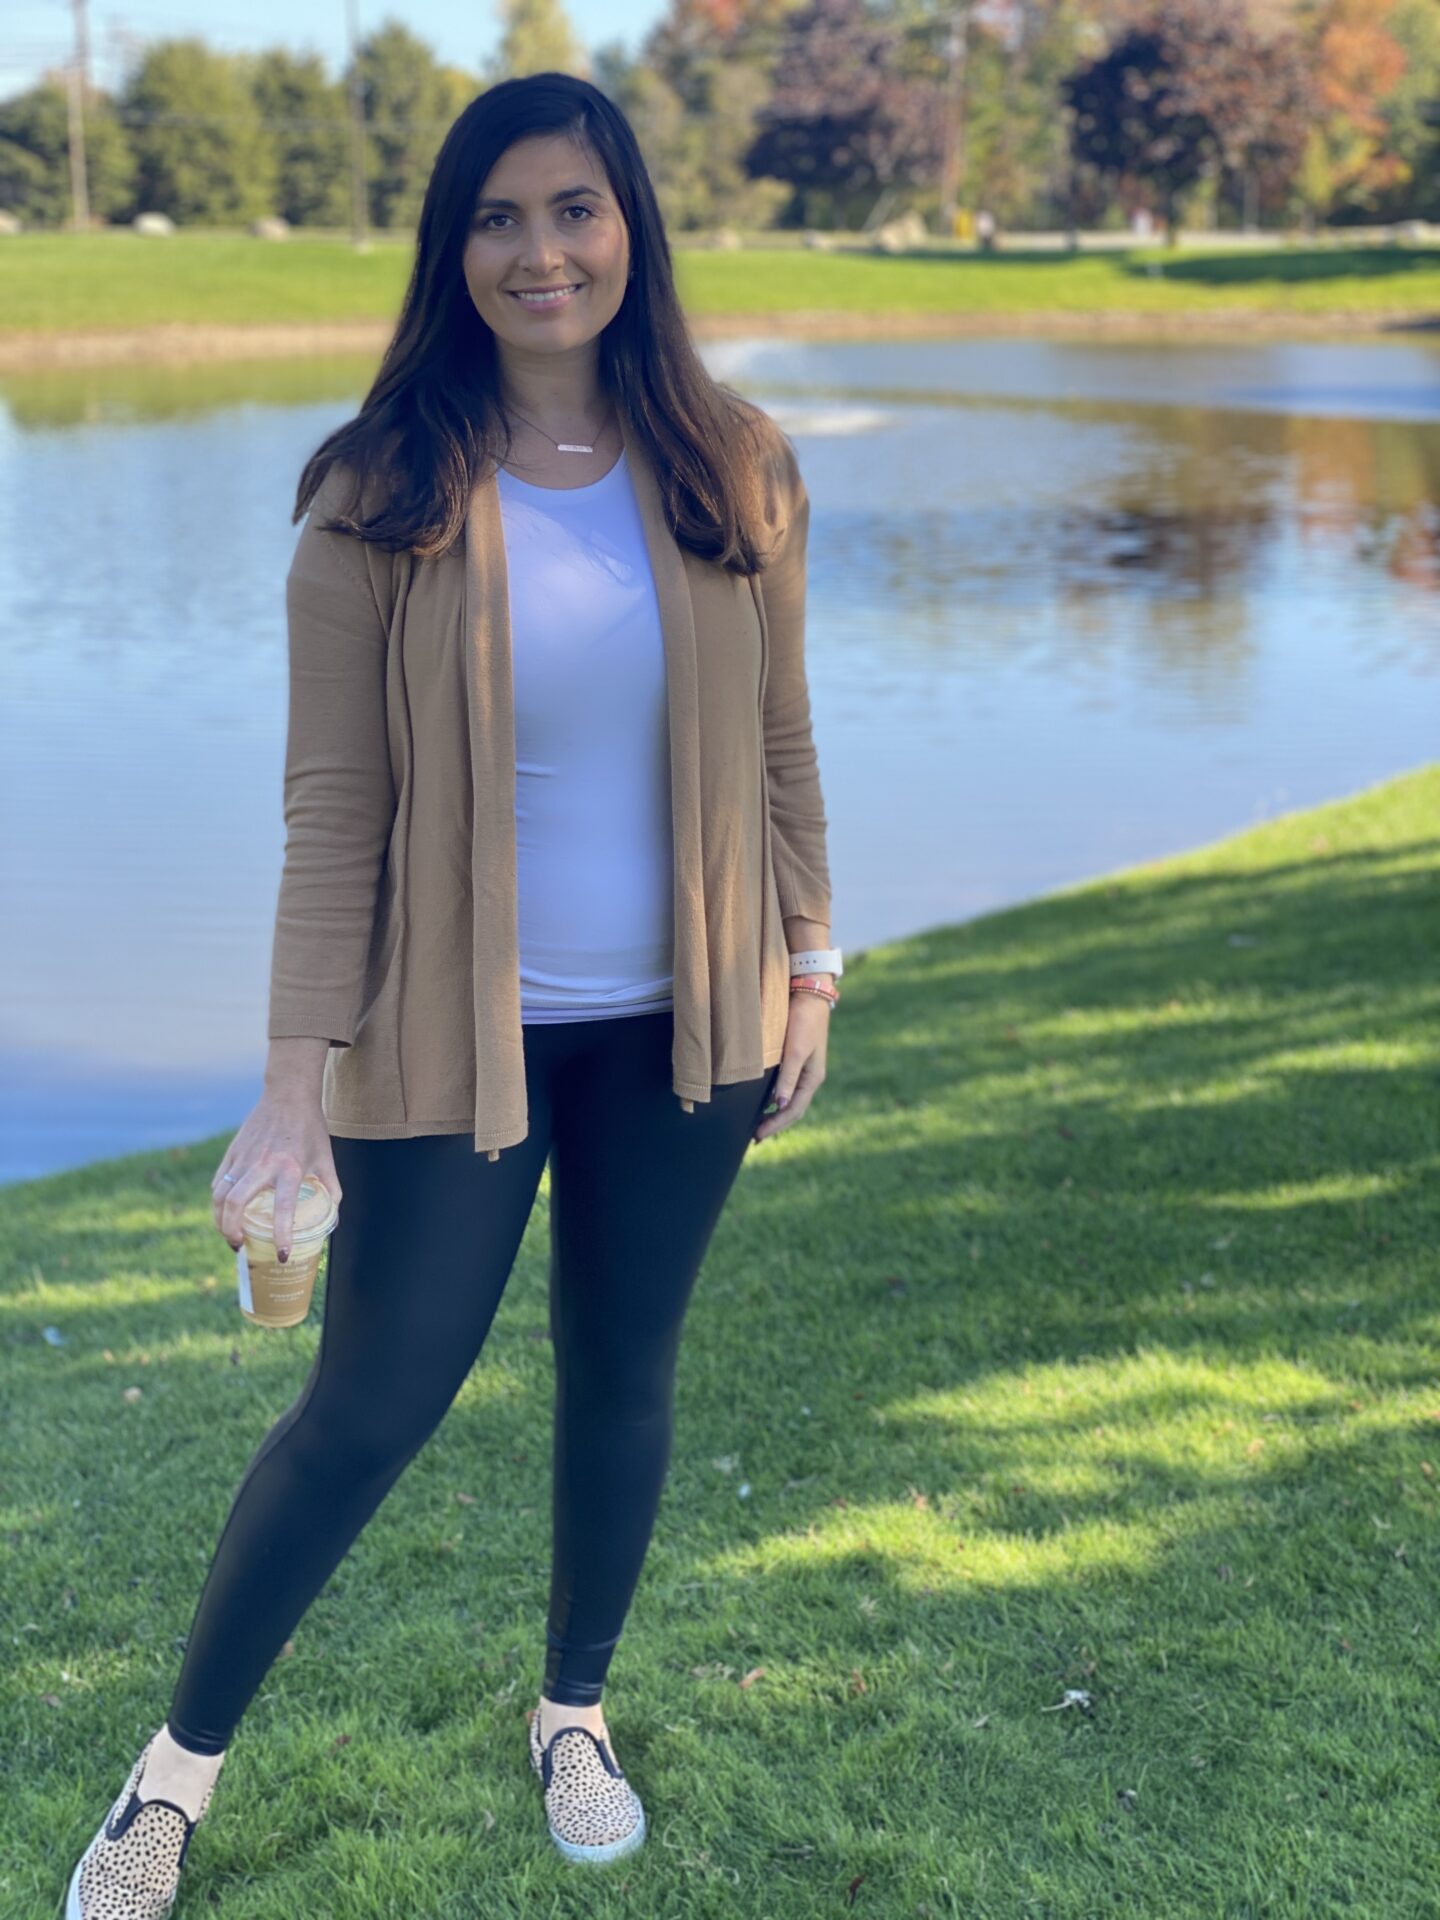 Spanx Leggings Outfit Idea & Prime Day Purchases - B Loved Boston